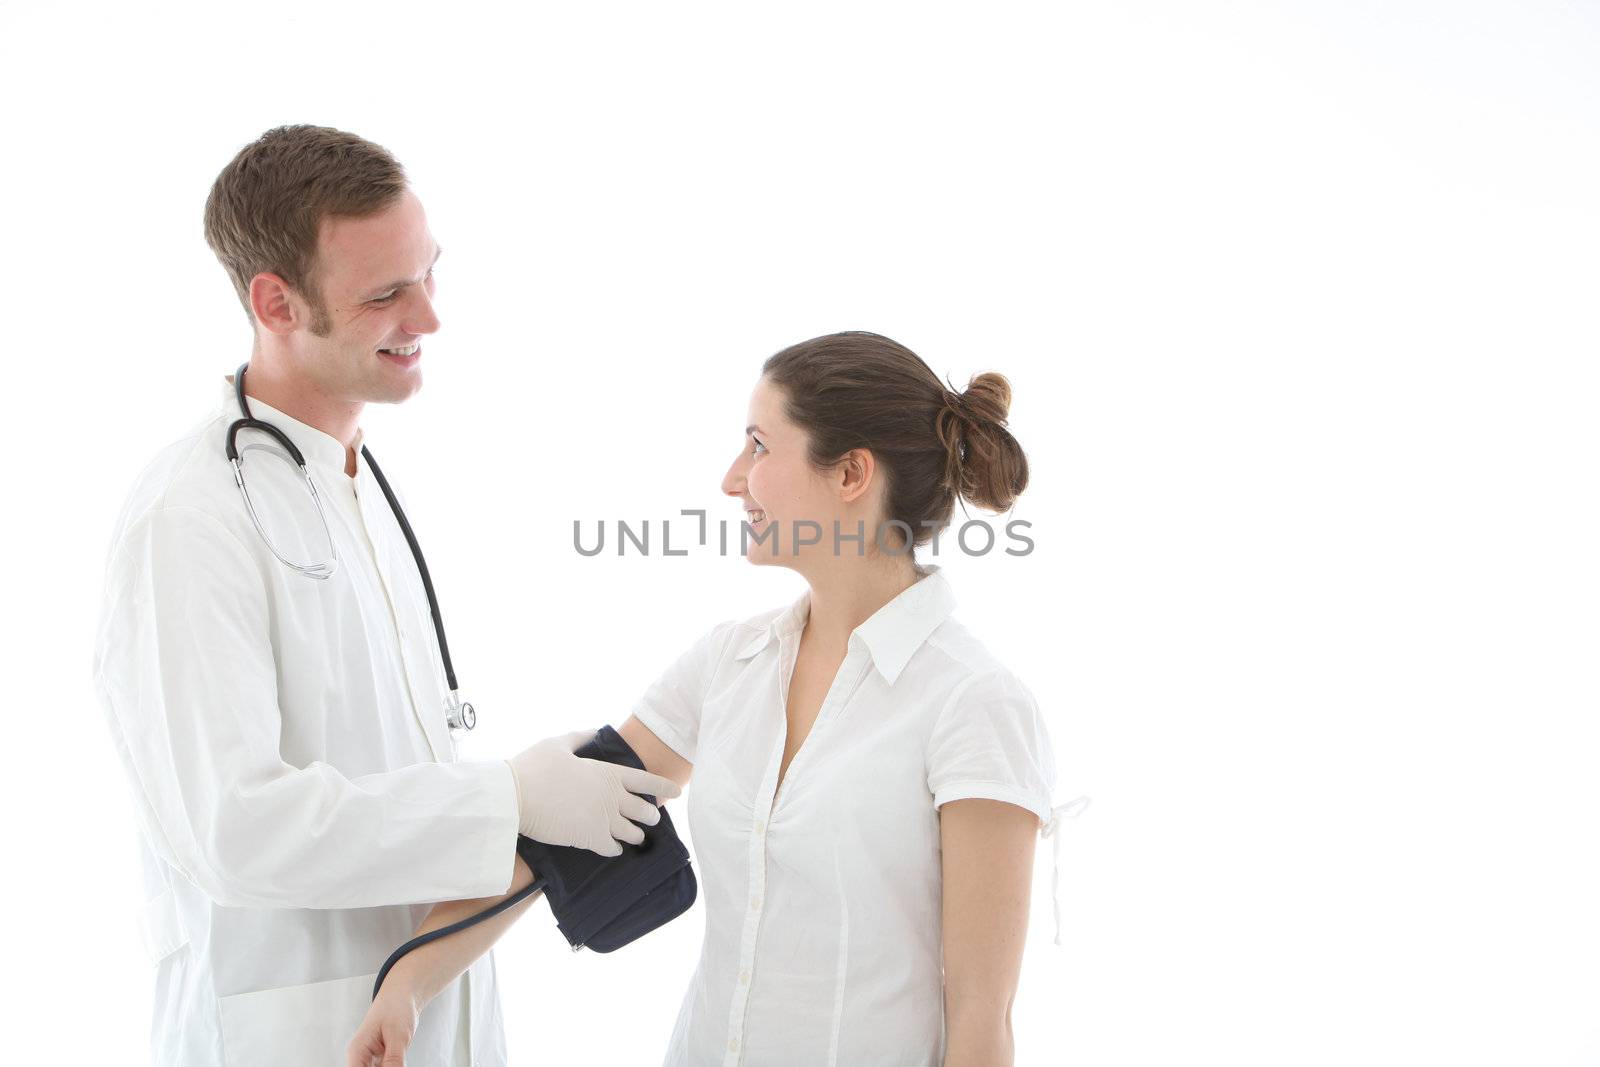 Smiling doctor applying the pressure cuff of a sphygmomanometer to take a blood pressure reading